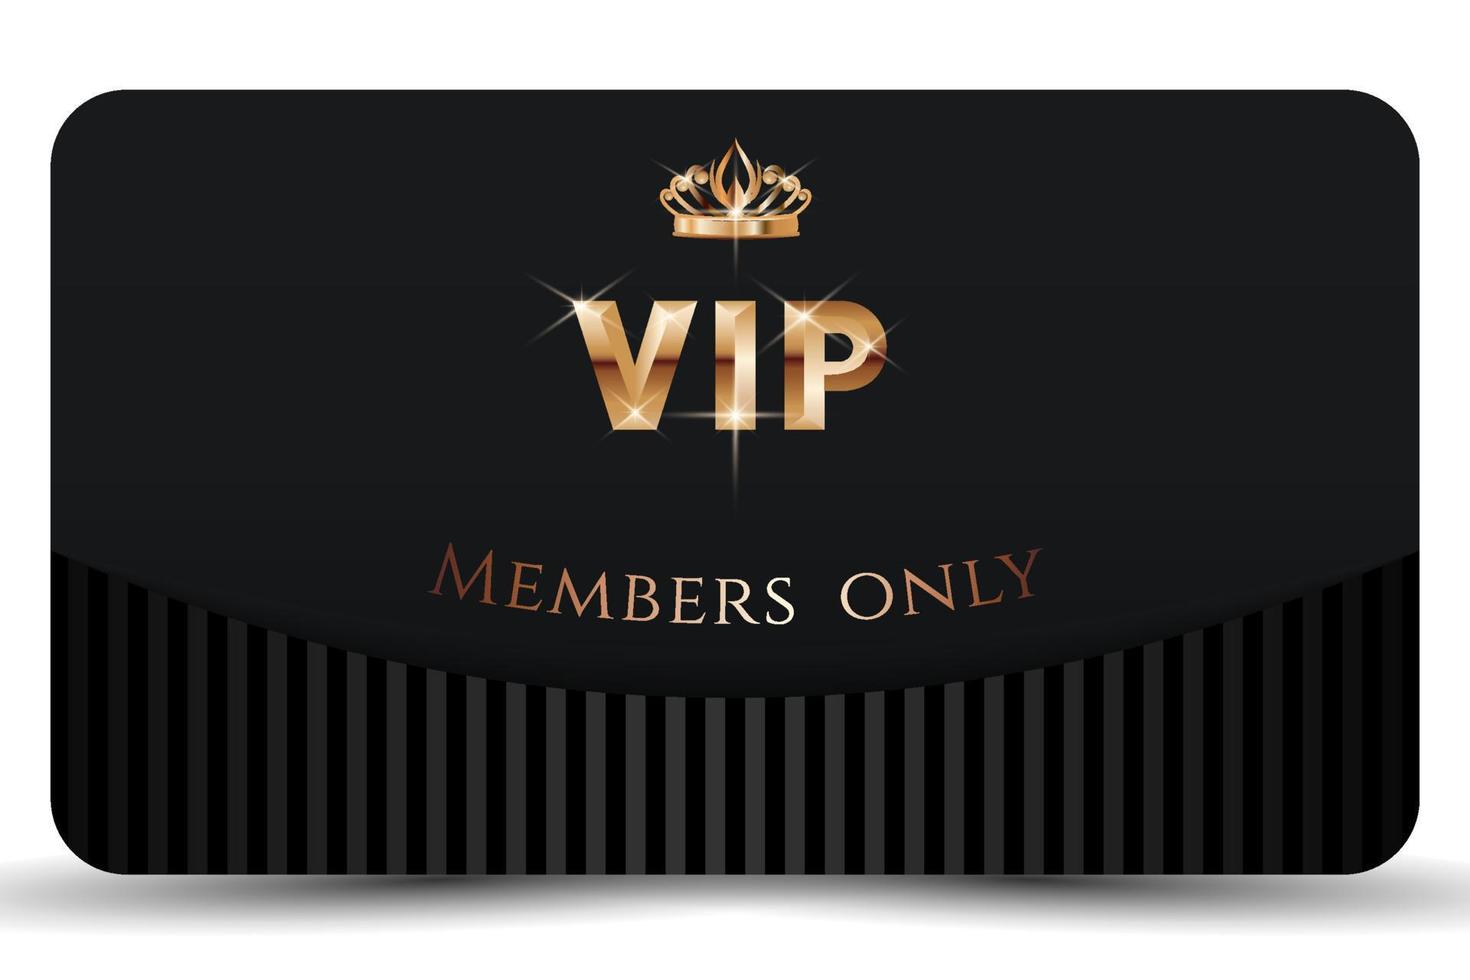 Golden and black elegant vip card template. Modern business card for members only. Royal design with 3d text, golden crown. Luxury abstract invitation on black background. Vector illustration